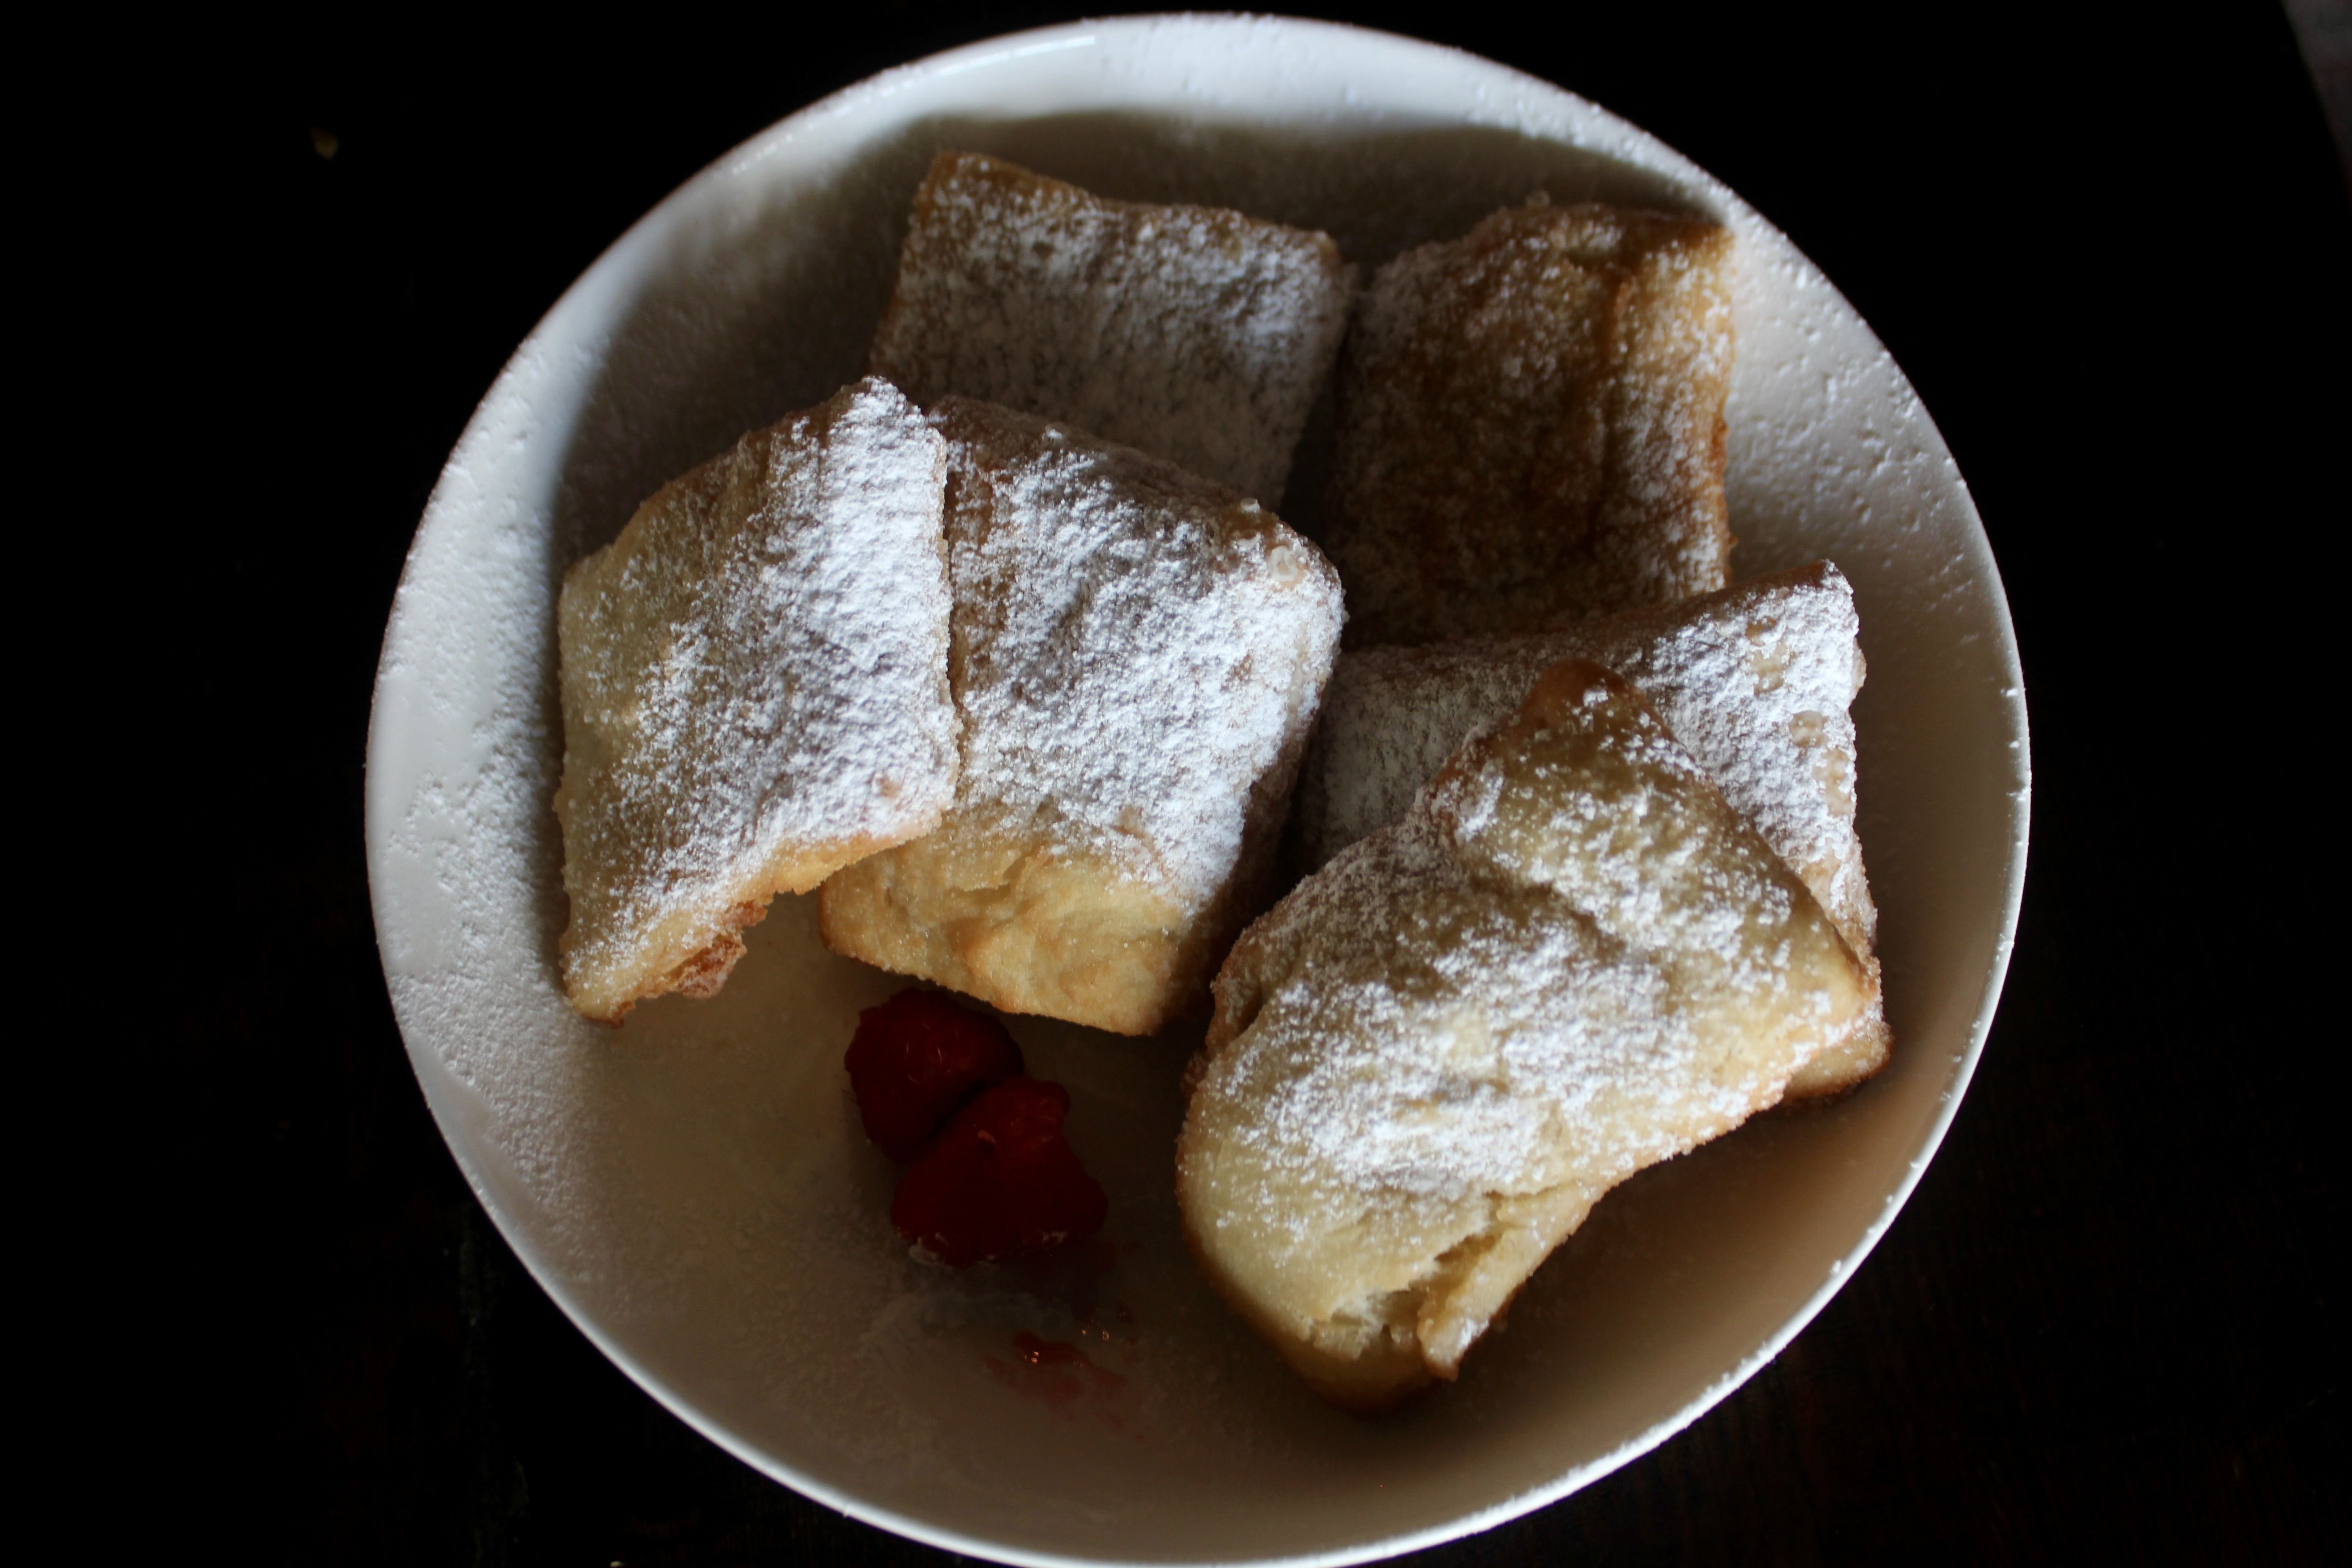 Beignets from the continental